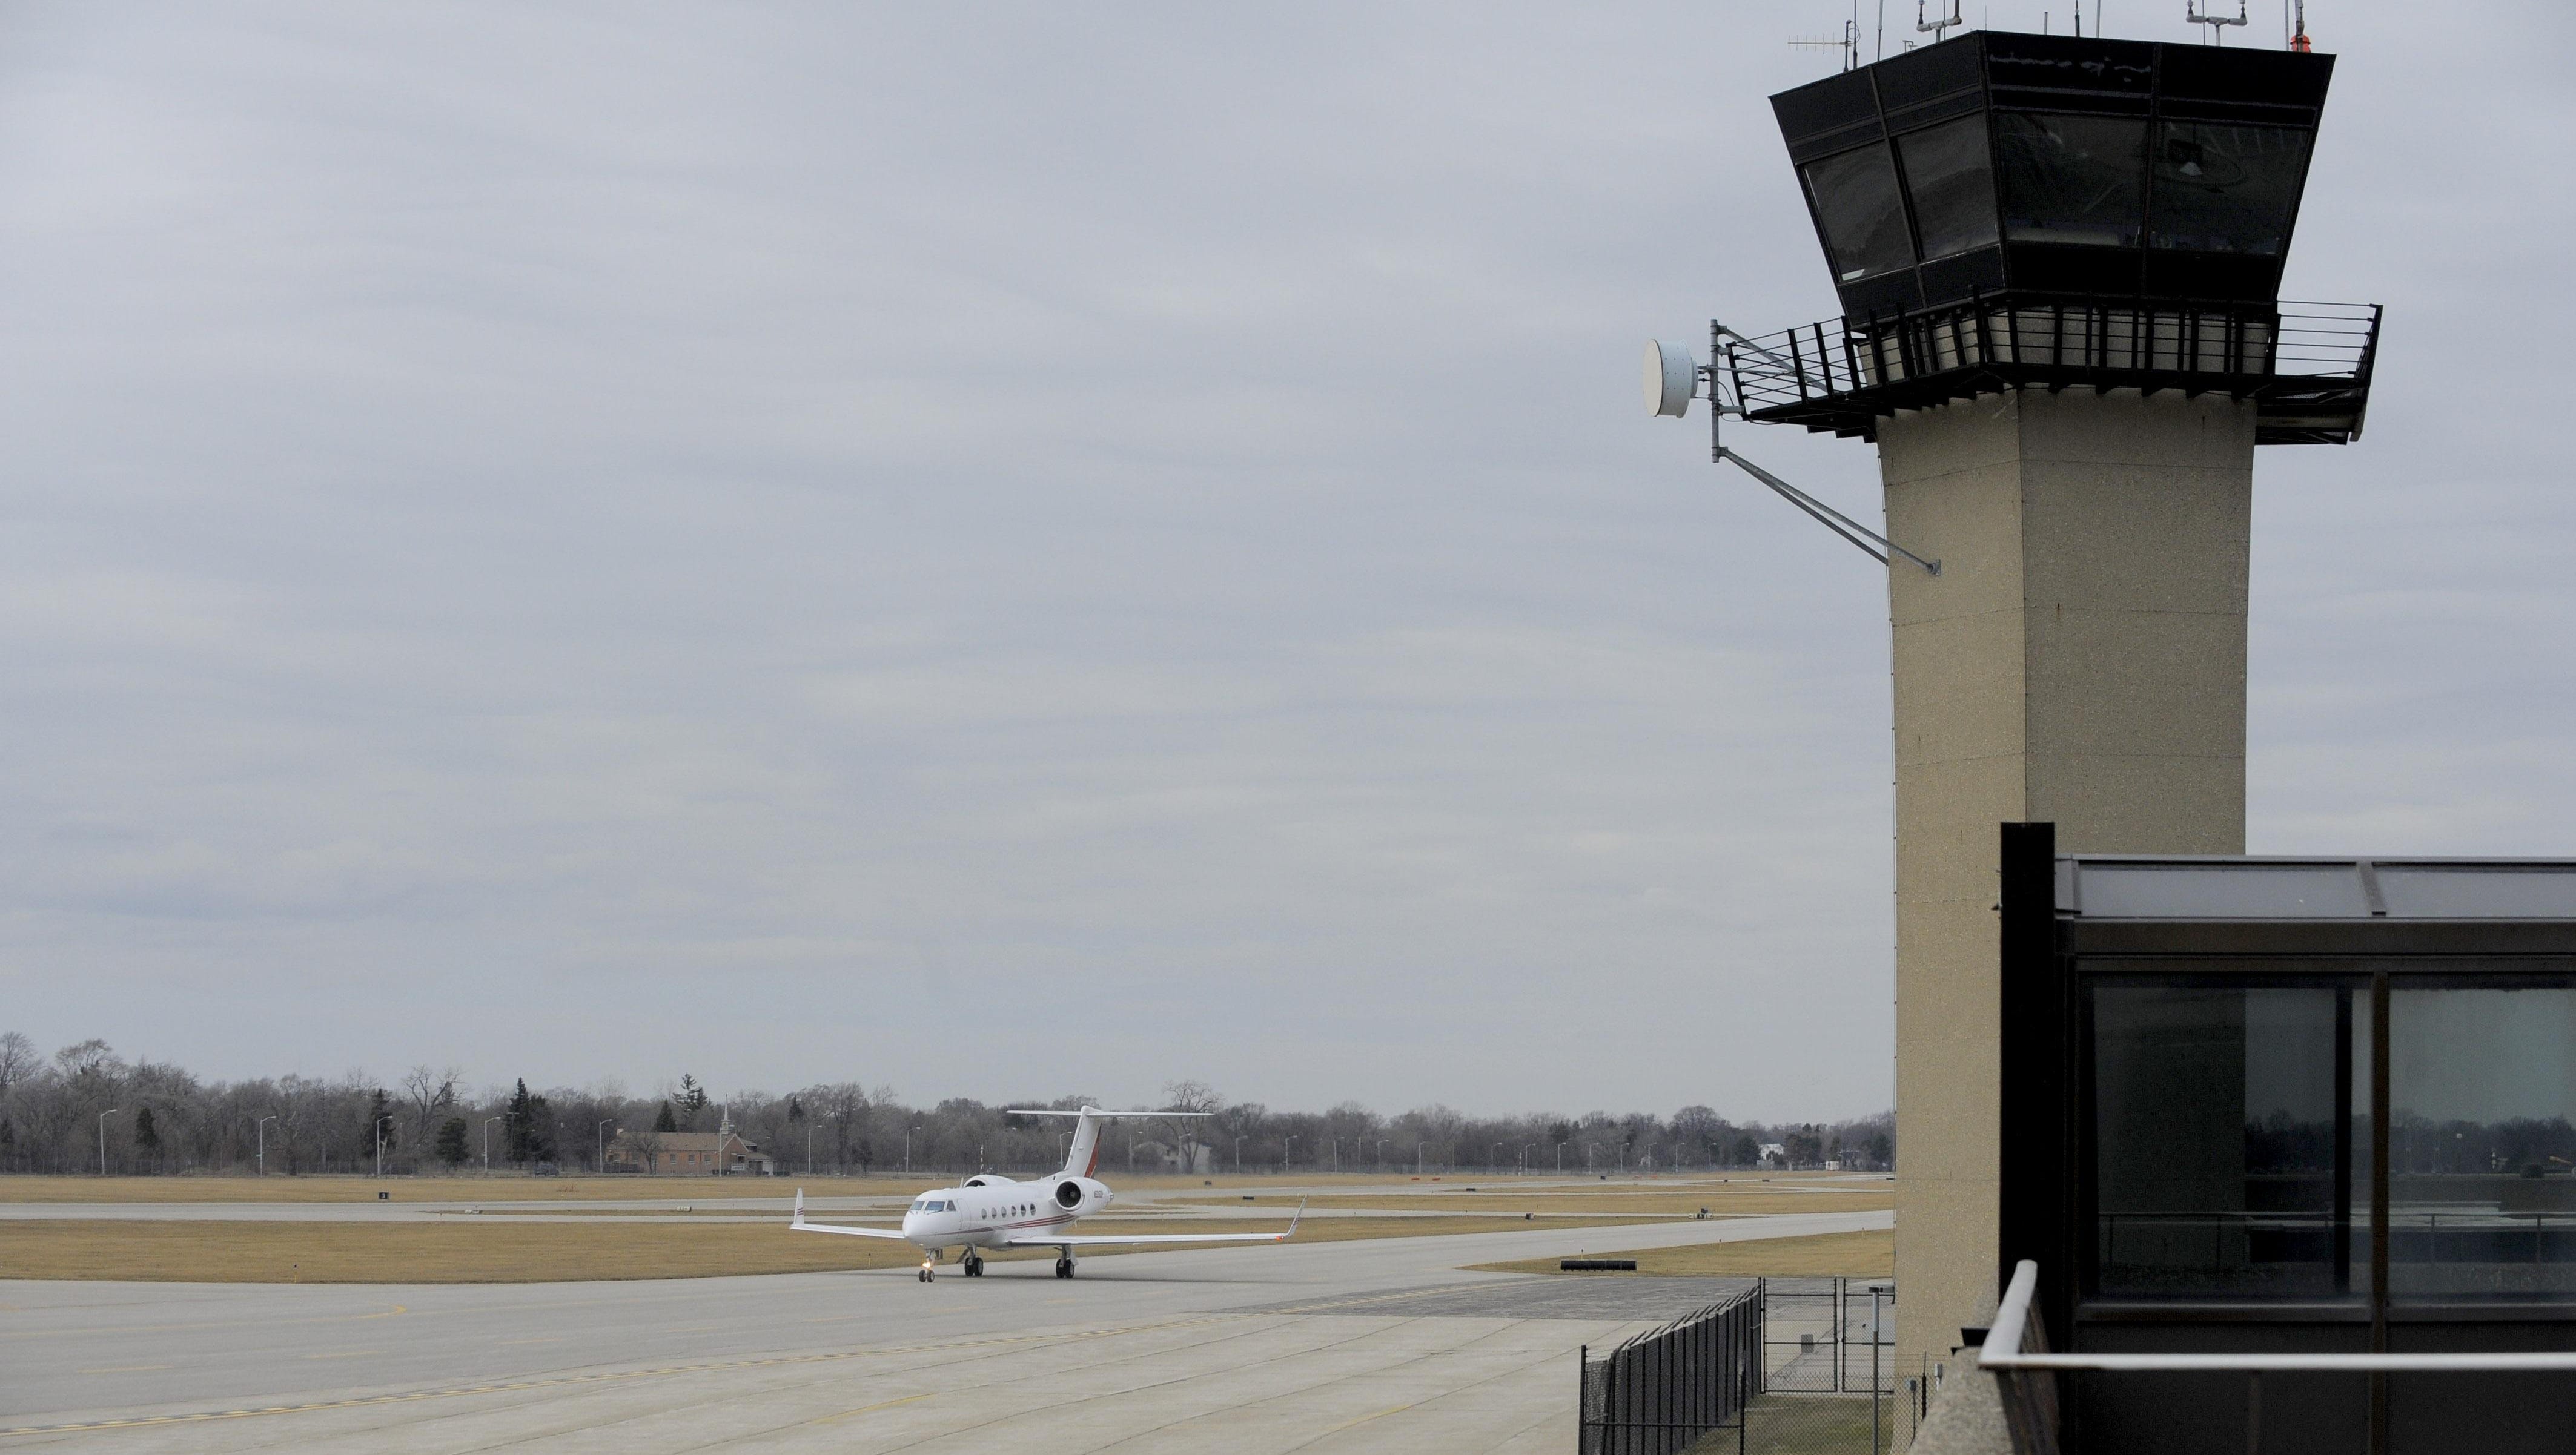 A plane taxis past the Detroit City Airport tower in this file photo from Friday March 20, 2015.